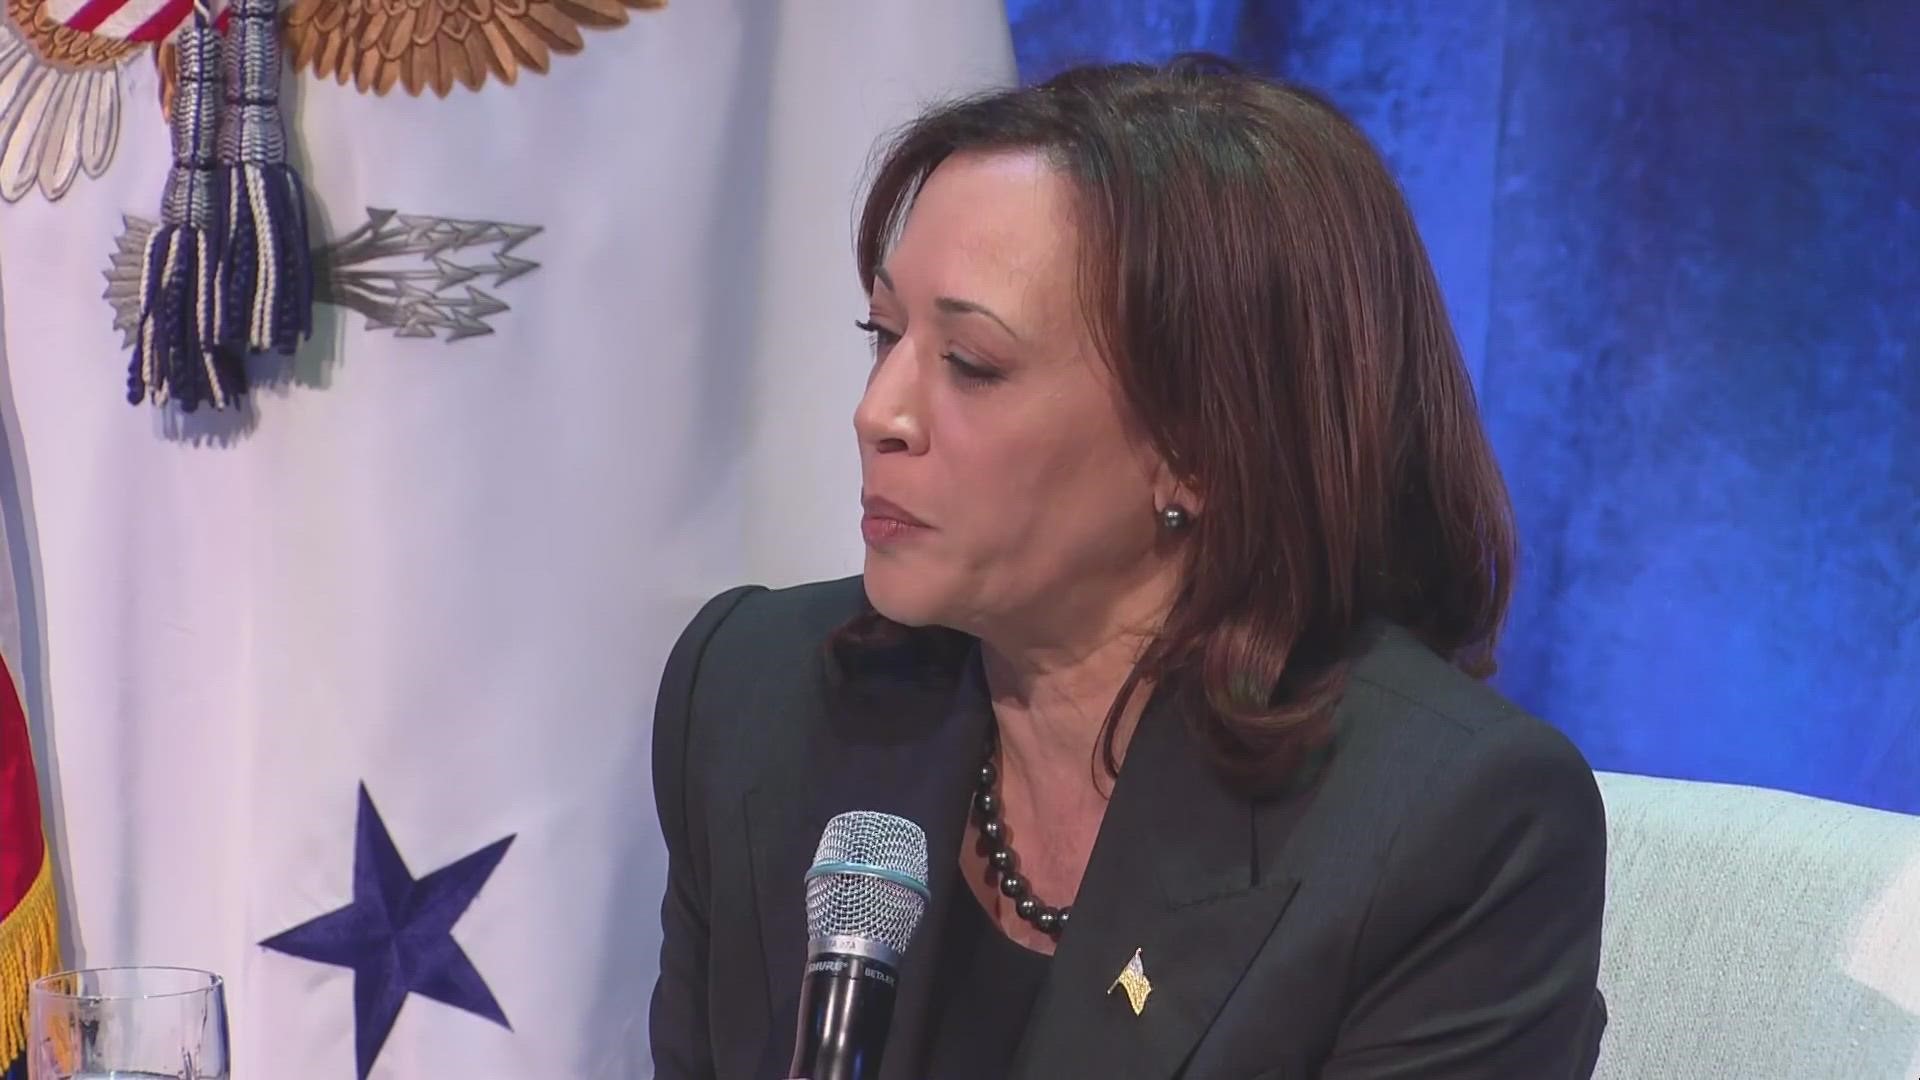 Vice President Kamala Harris discussed climate change during her visit. Expect closures and delays on I-70 and Wadsworth Boulevard.